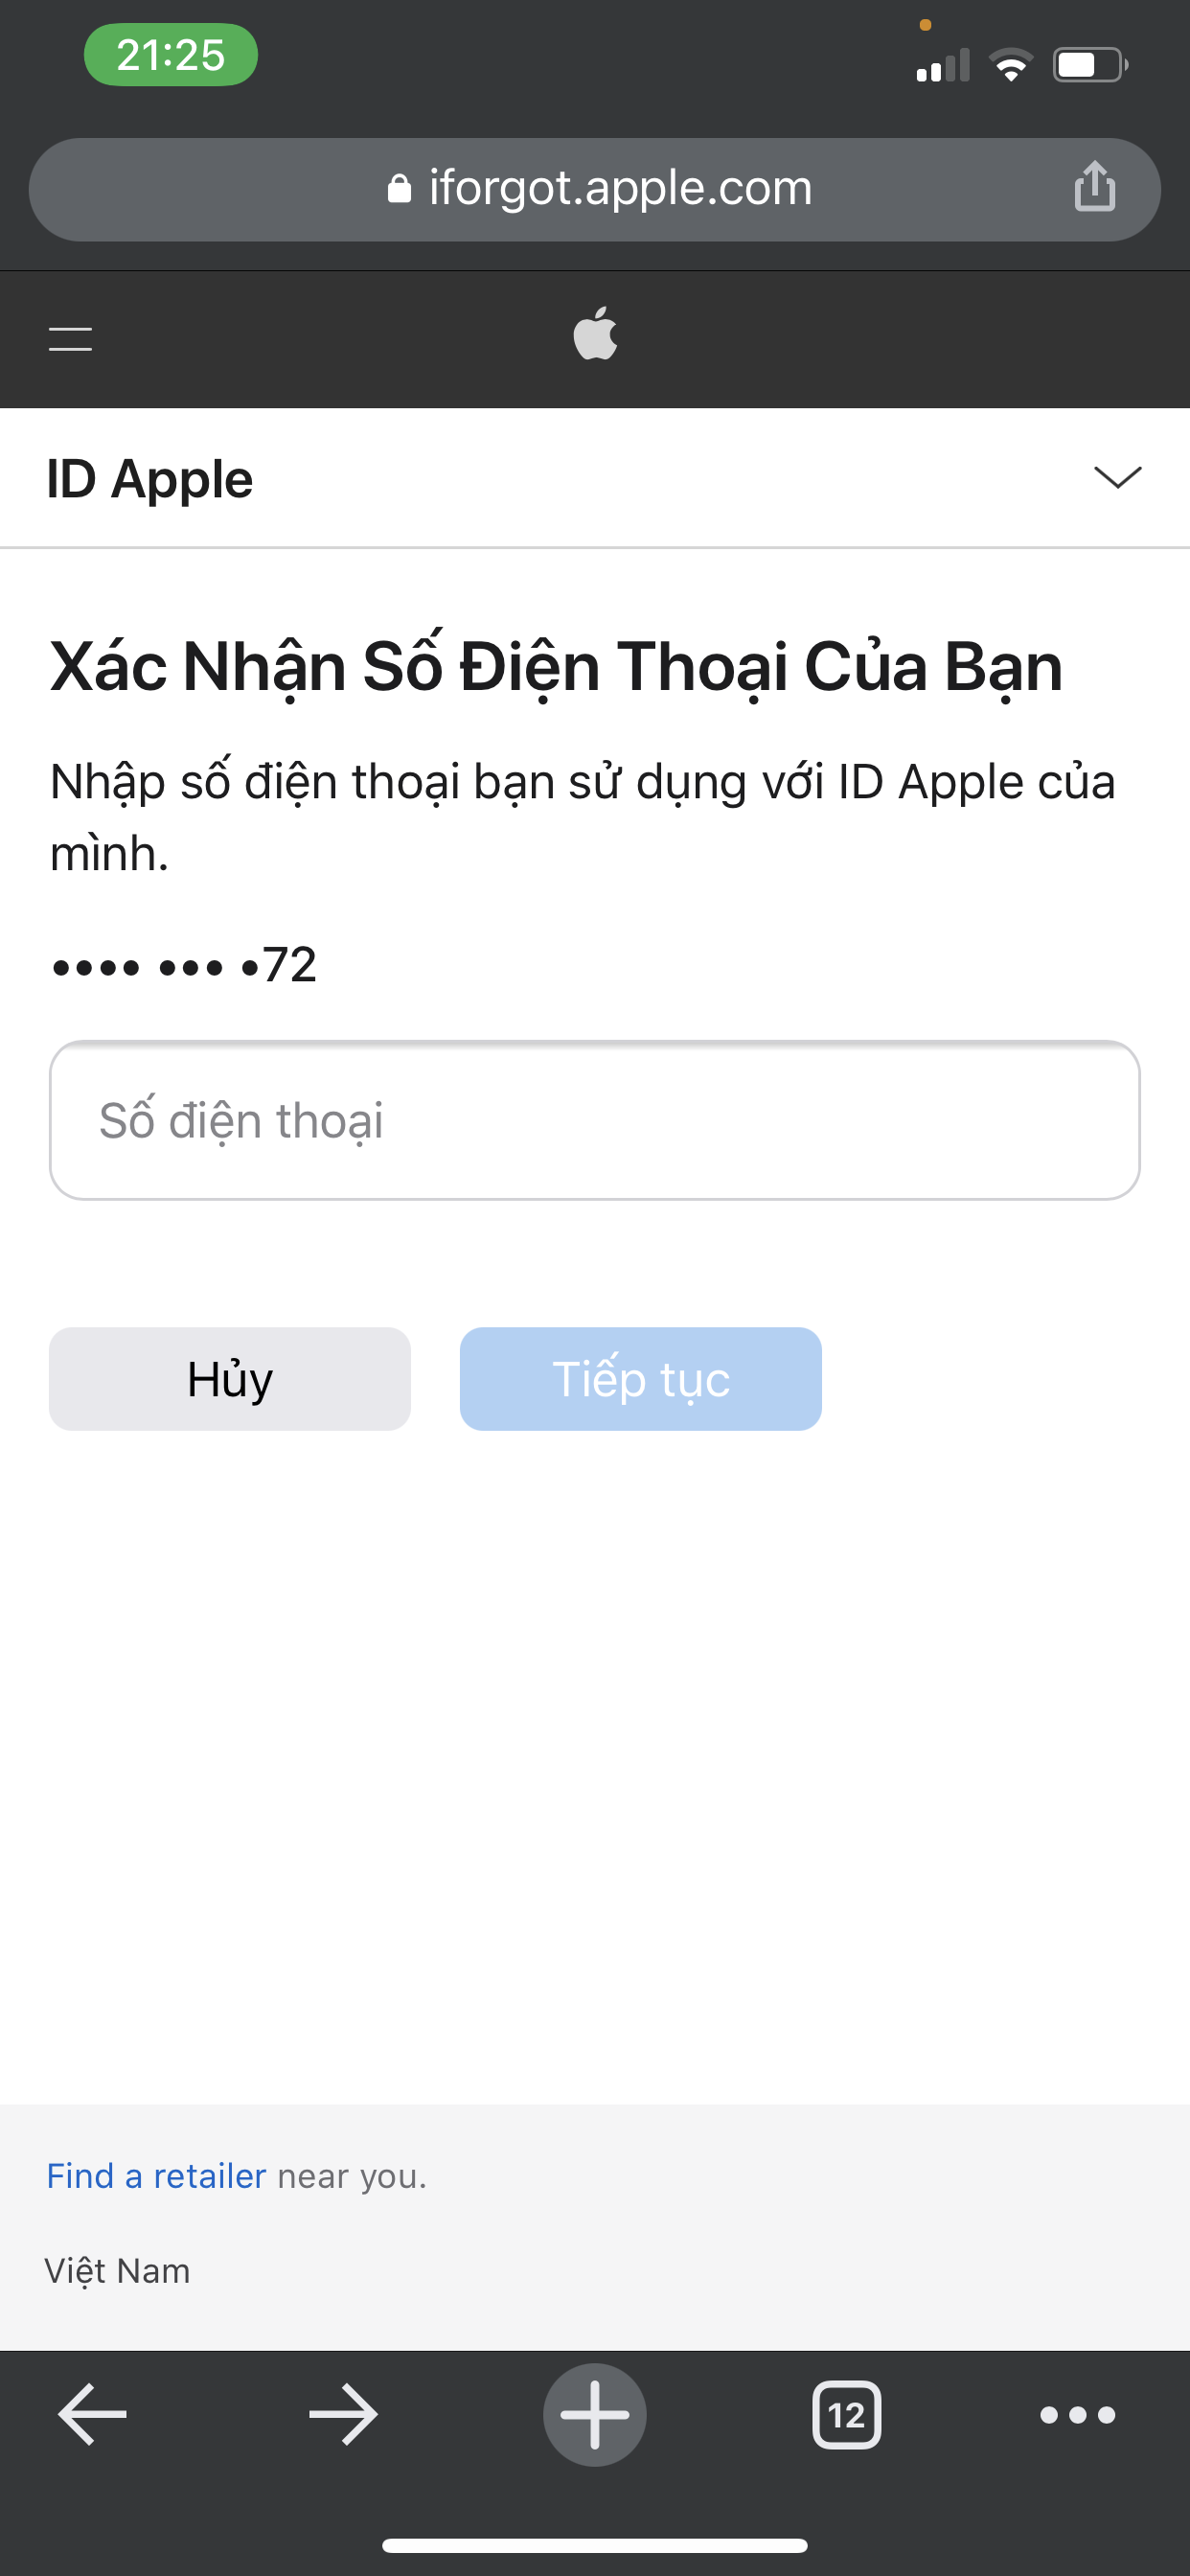 I cannot login with apple id on my call o… - Apple Community